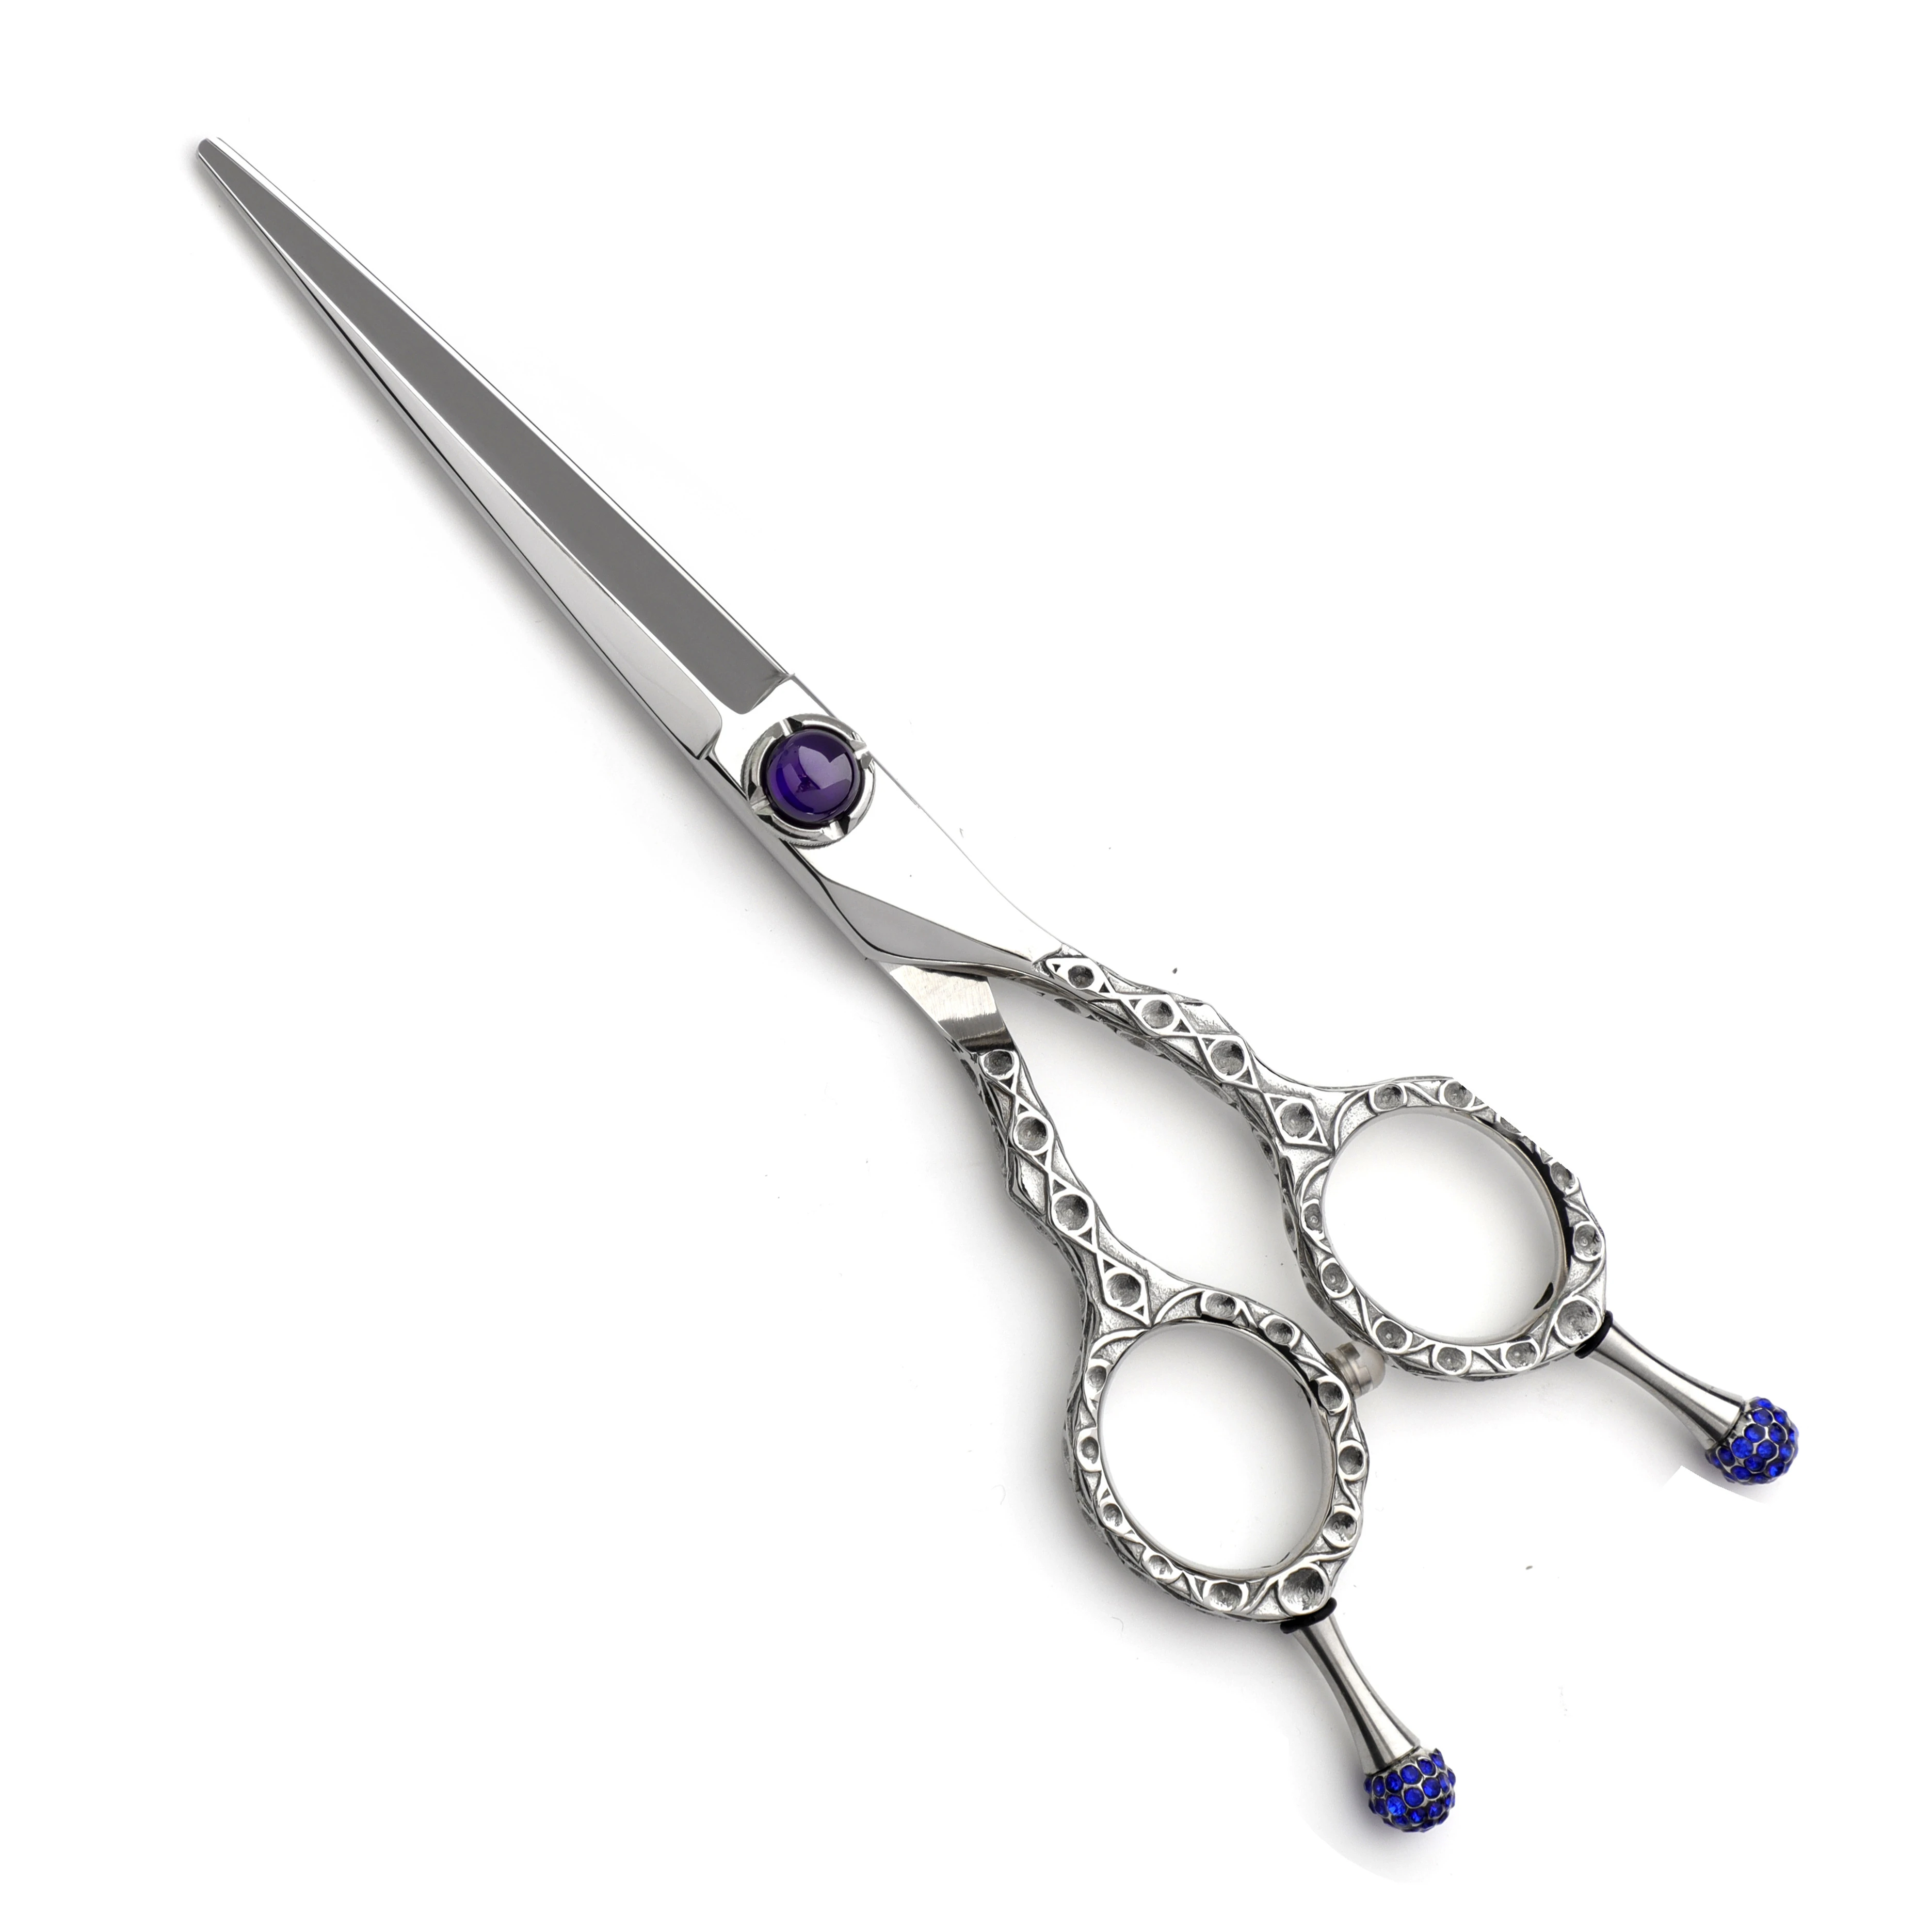 Fantastic Blades of  Hair Scissors Made of Japan  440C Stainless Steel Hair Cutting Shears Thinning Scissors